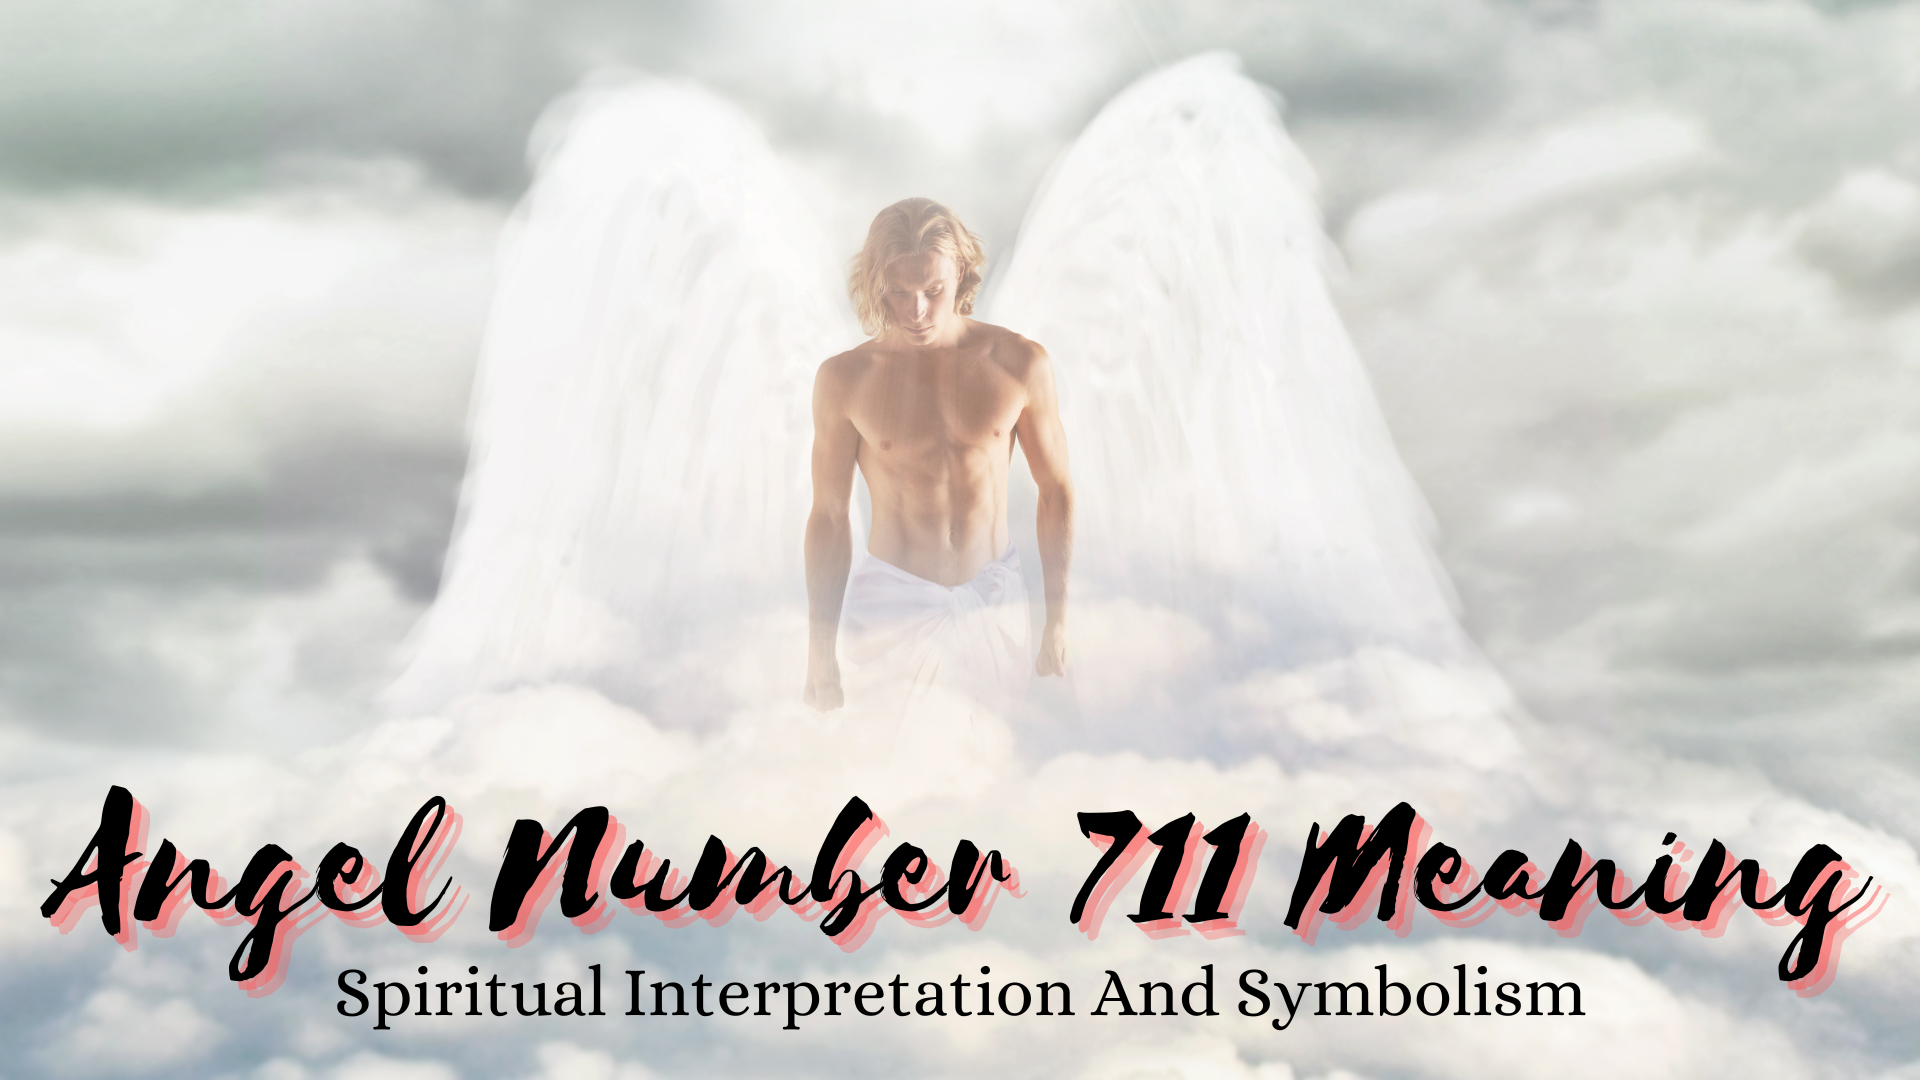 Angel Number 711 Meaning  And Symbolism And Spiritual Interpretation